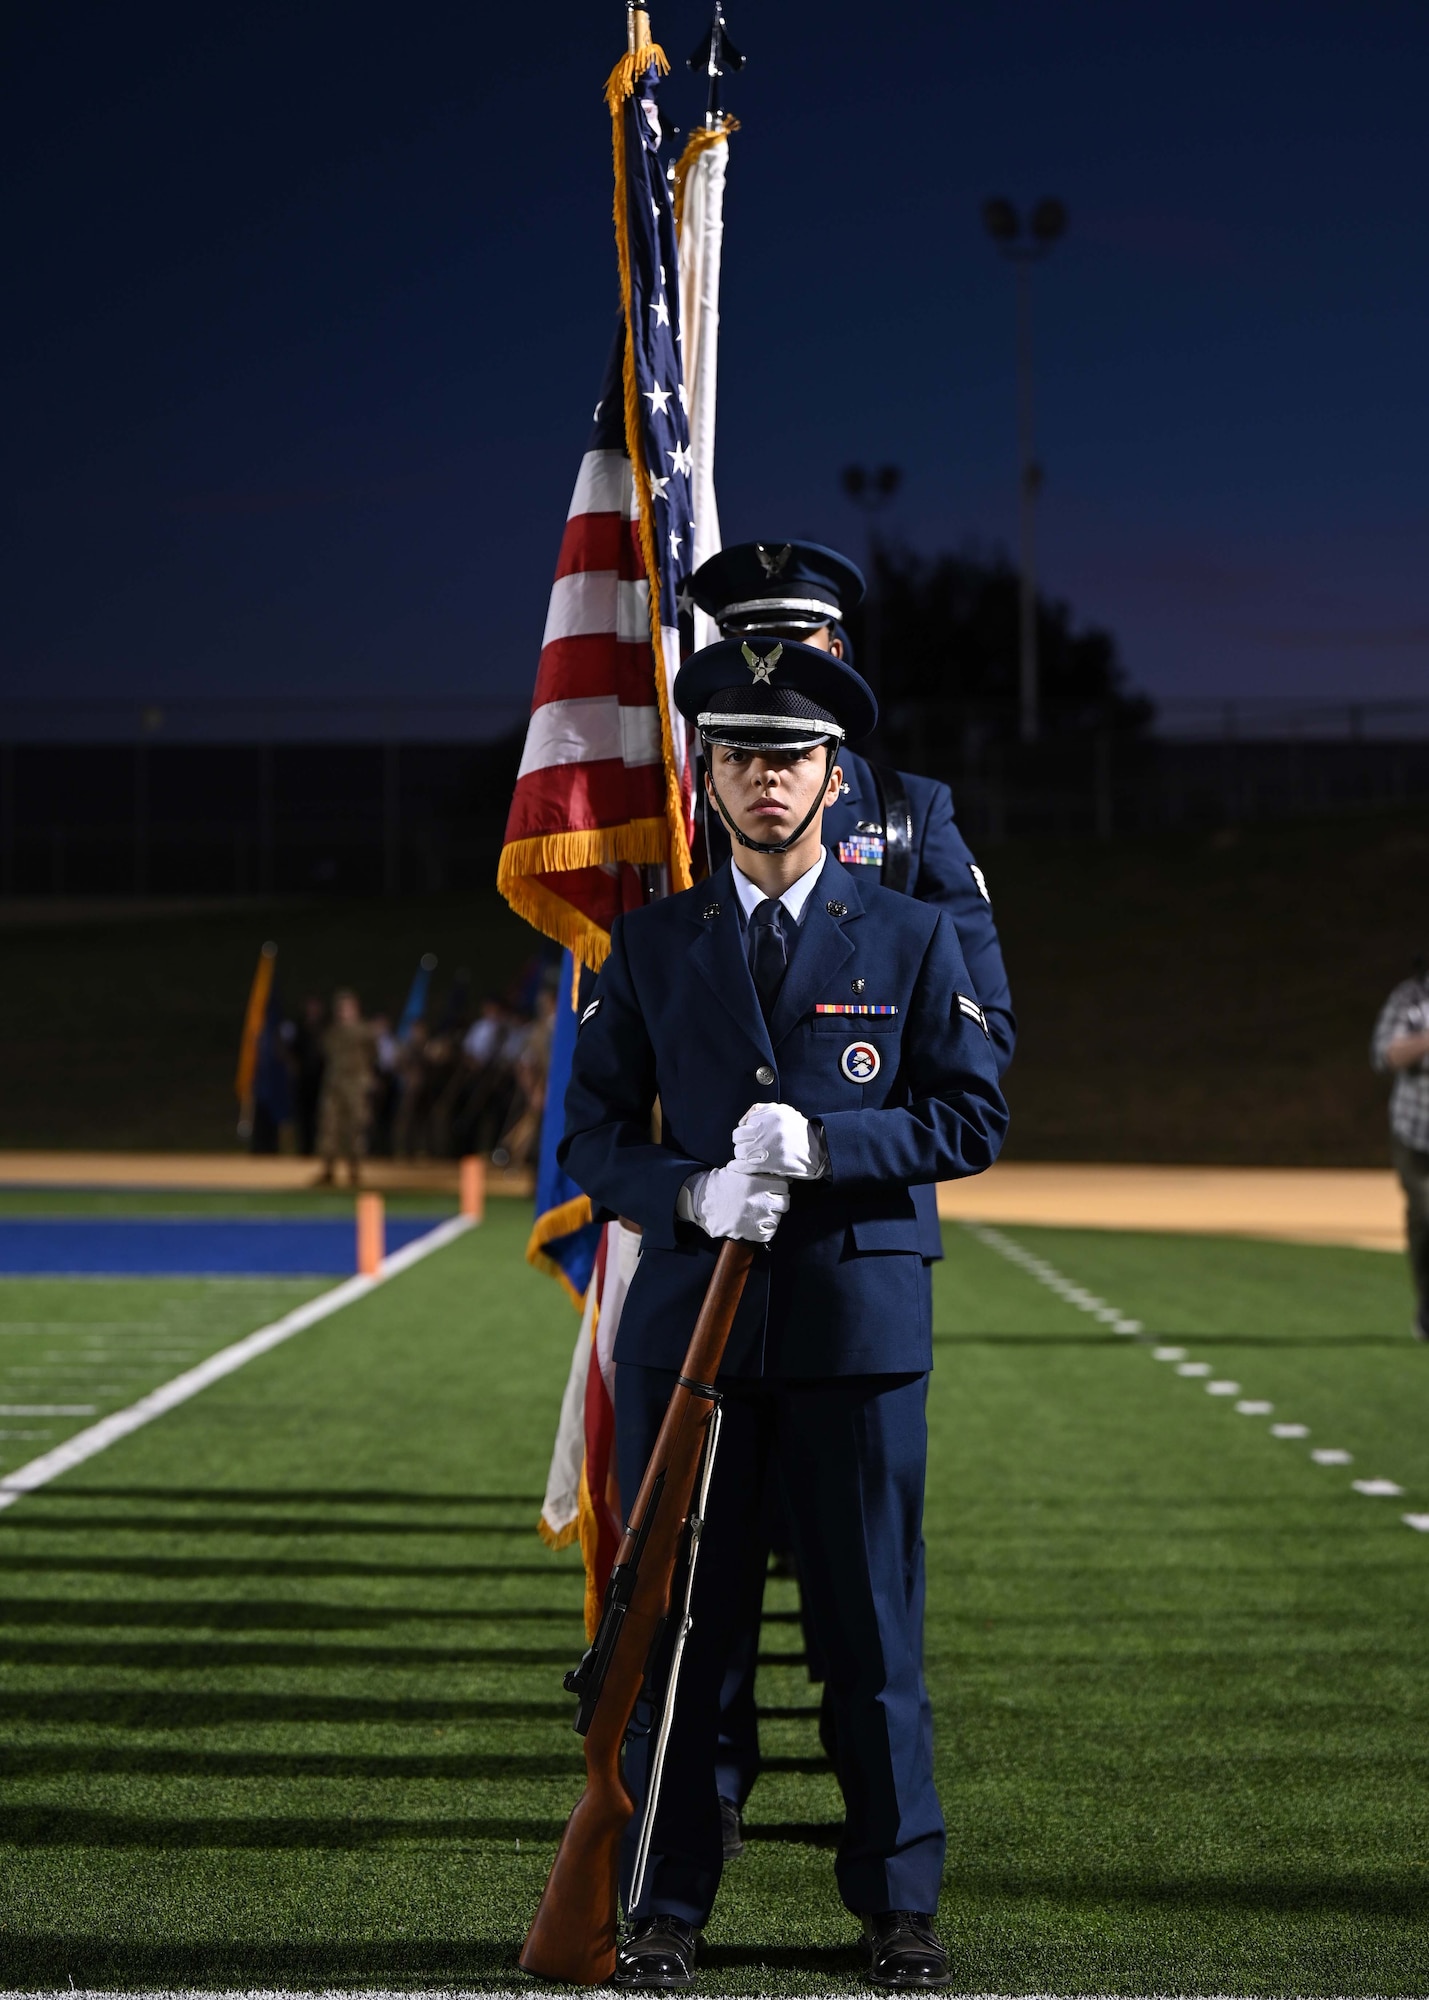 Goodfellow Air Force Base Honor Guardsmen prepare to present the colors at Military Appreciation Night, Angelo State University, Nov. 5, 2022. Military members and veterans were honored throughout the day at festivities before the game. (U.S. Air Force photo by Senior Airman Ethan Sherwood)